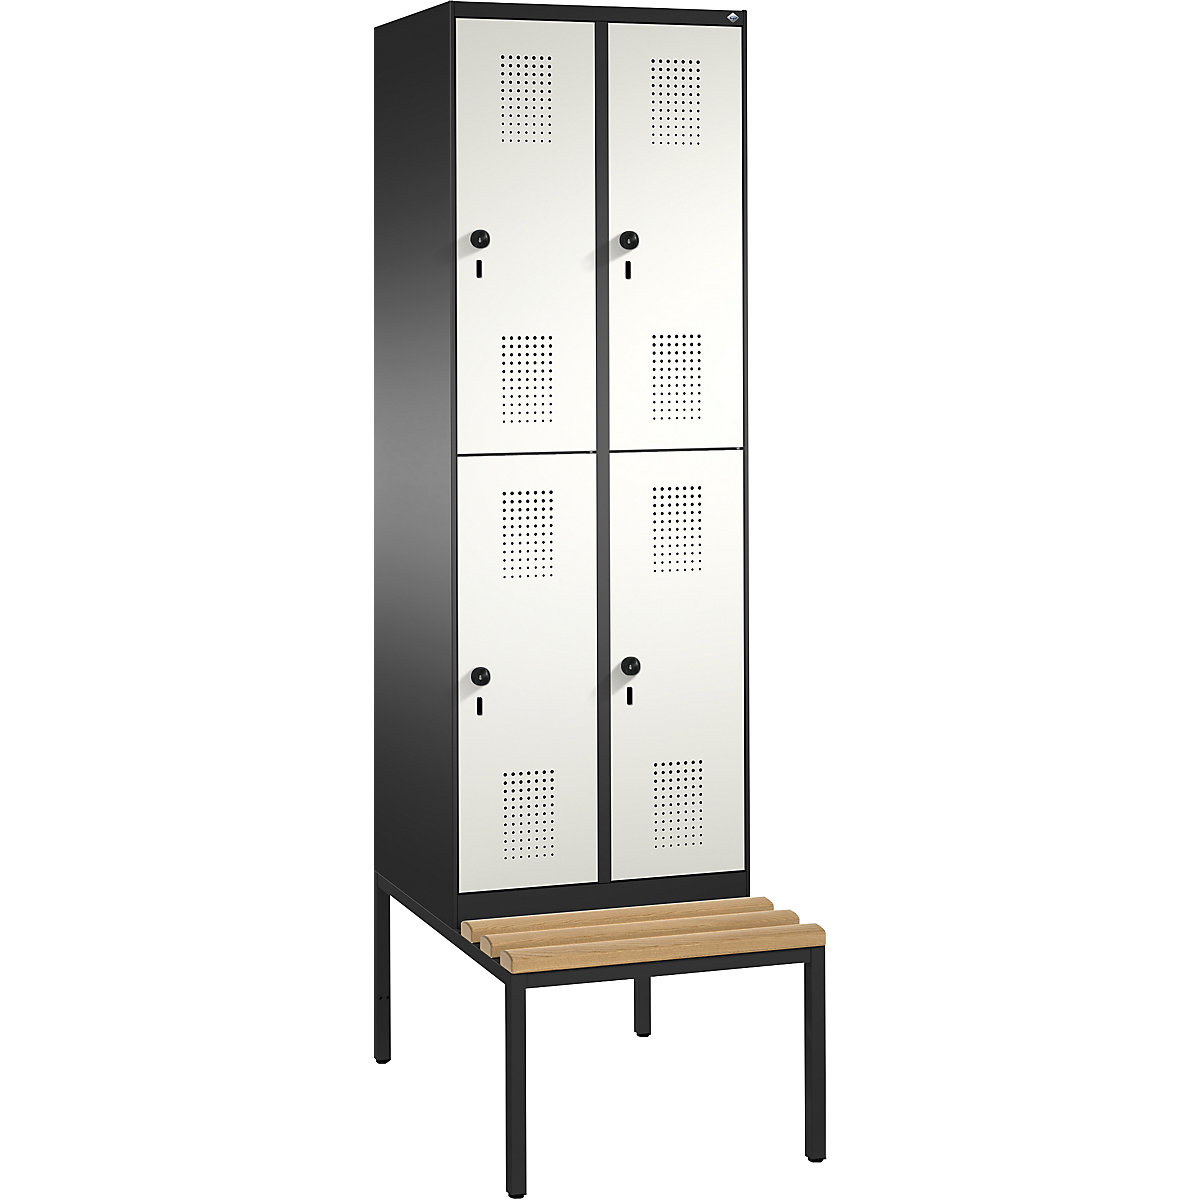 EVOLO cloakroom locker, double tier, with bench – C+P, 2 compartments, 2 shelf compartments each, compartment width 300 mm, black grey / pure white-14